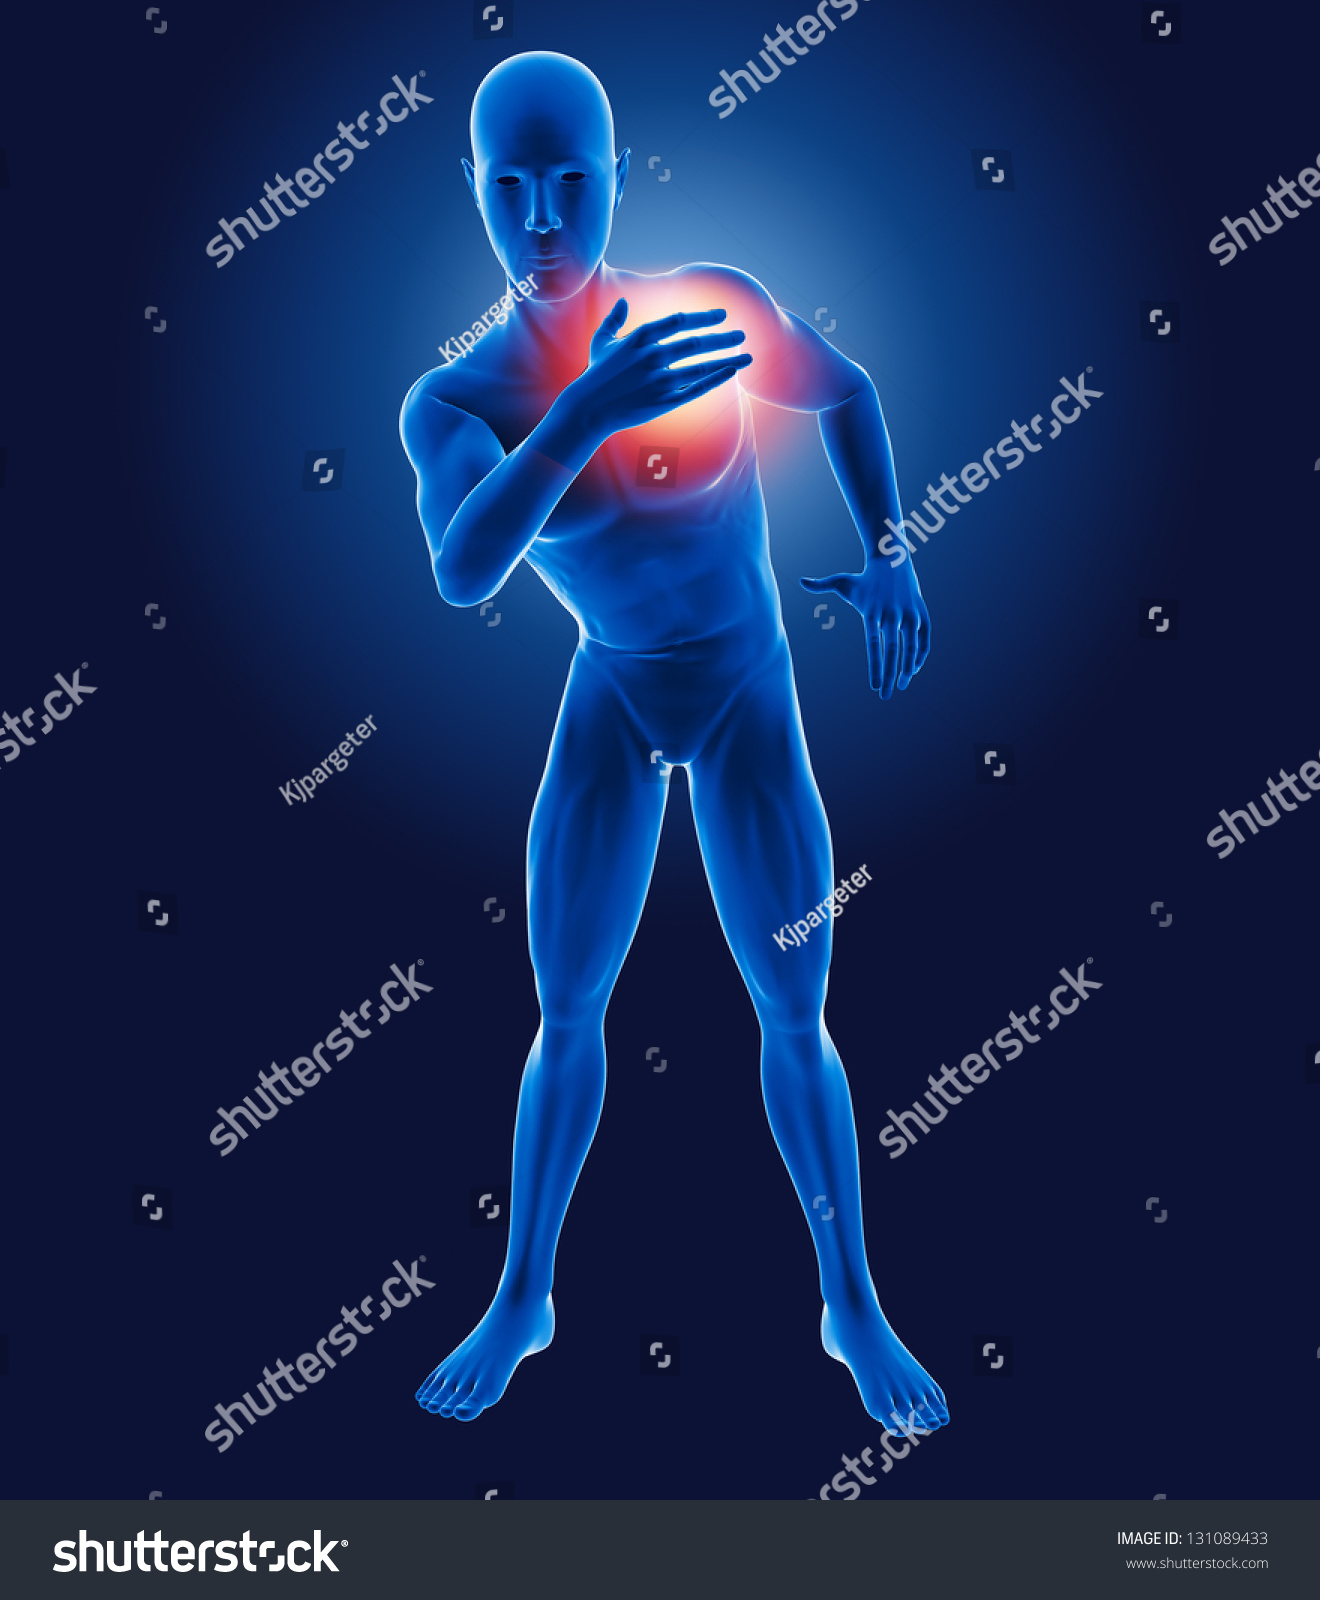 3d Medical Man With Chest Pain Stock Photo 131089433 : Shutterstock